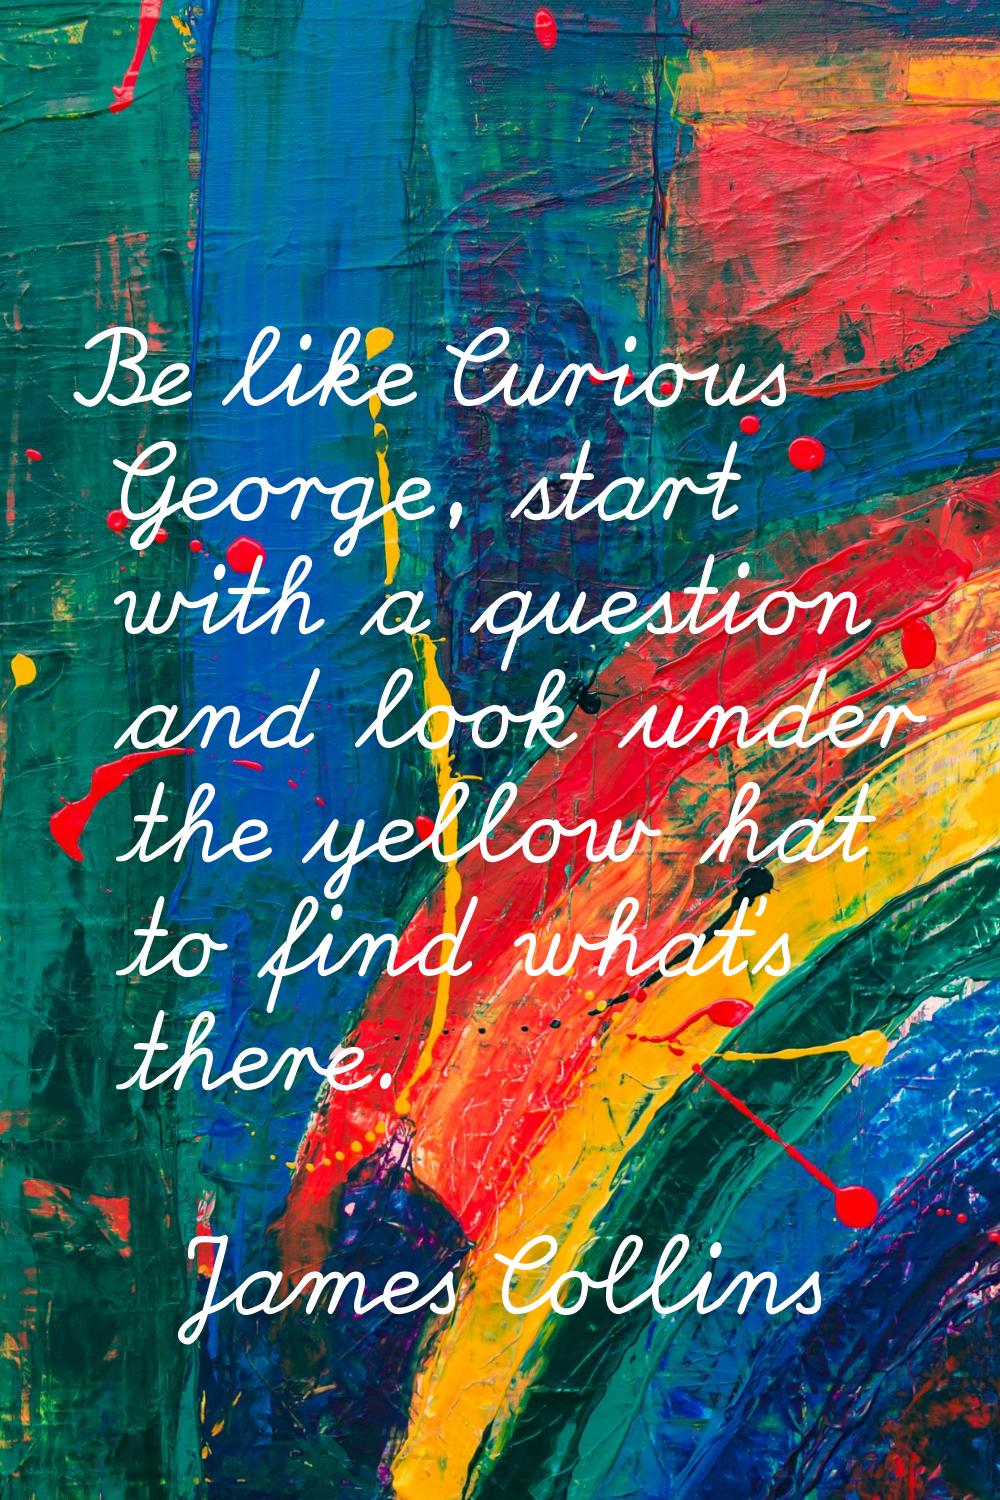 Be like Curious George, start with a question and look under the yellow hat to find what's there.